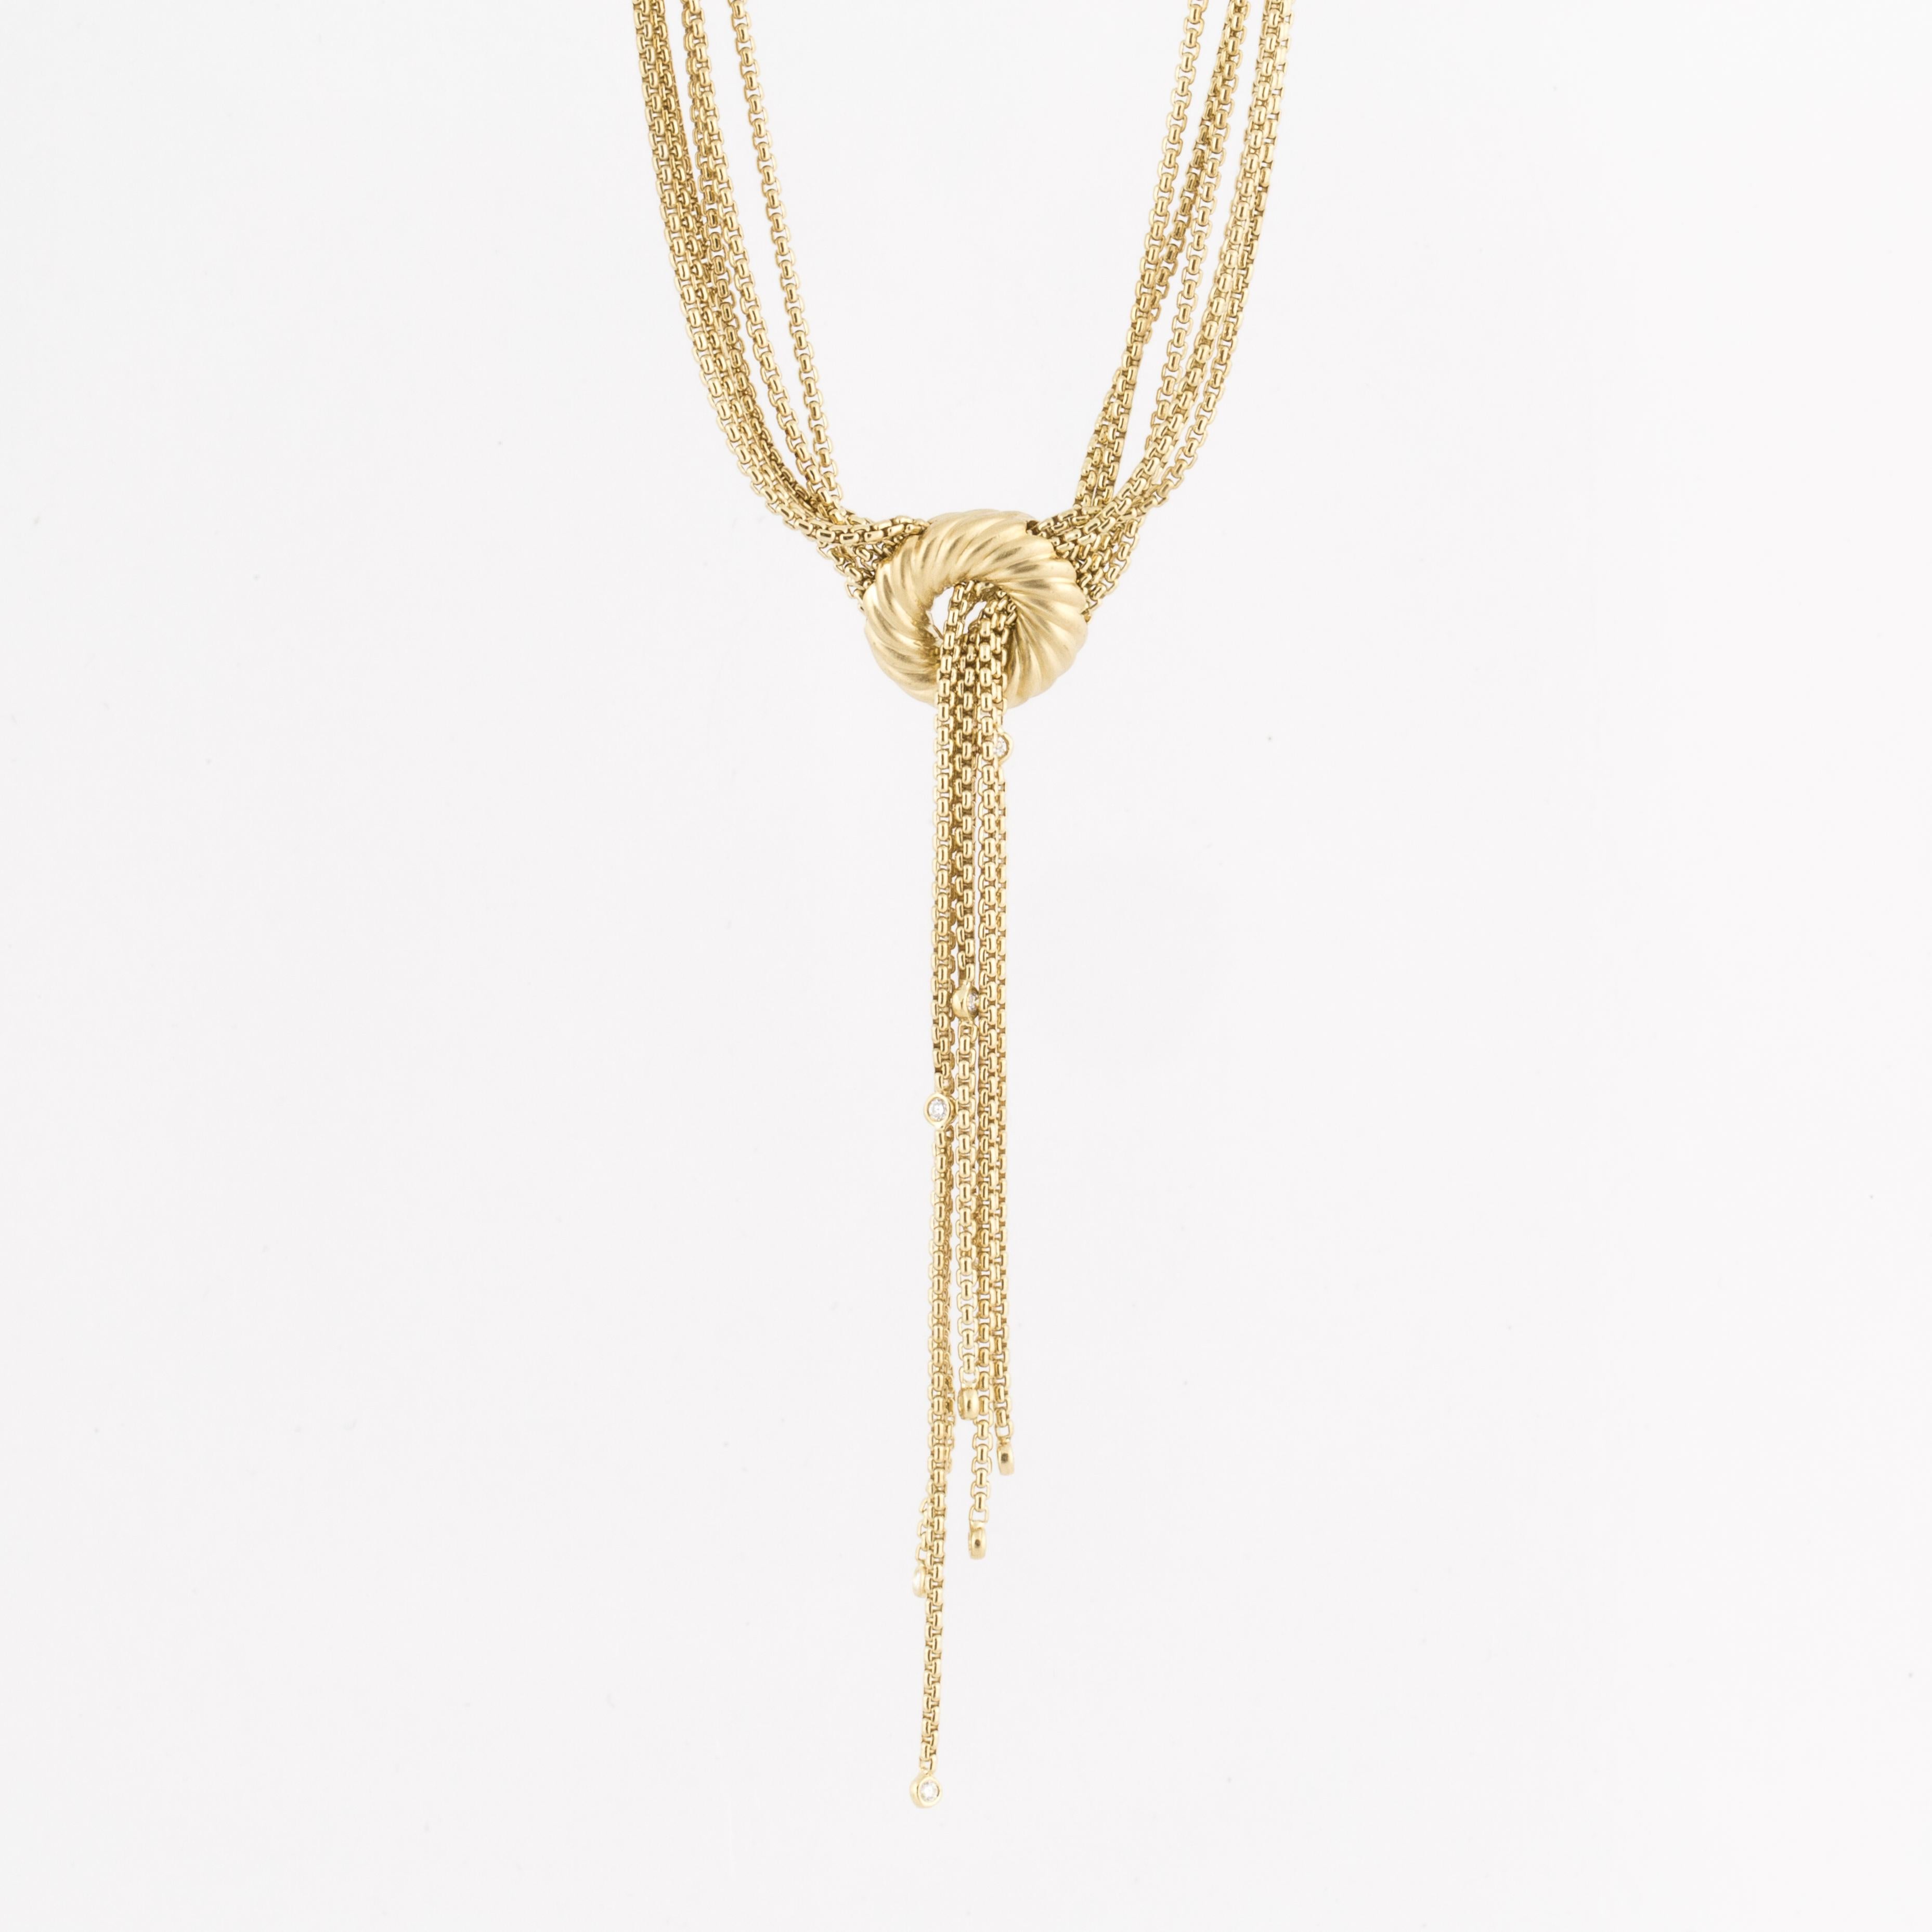 David Yurman 18K yellow gold multi strand lariat necklace.  There are six chains with a small diamond at the bottom of each one.  Circle pendant measures 3/4 inches across.  Length is 17 inches at the longest length, but is adjustable to be worn